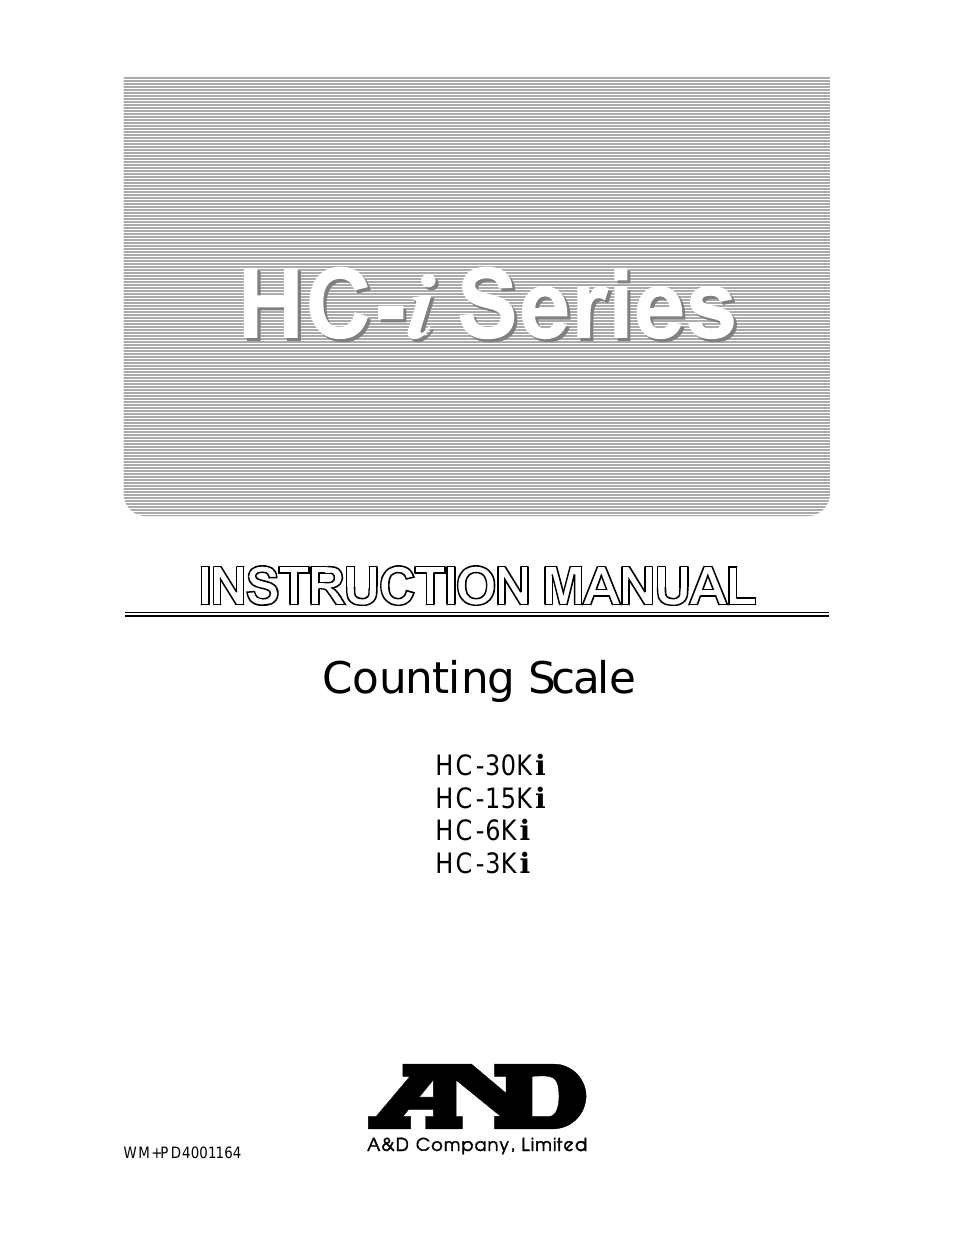 Counting Scale HC-30Ki (Page 1)